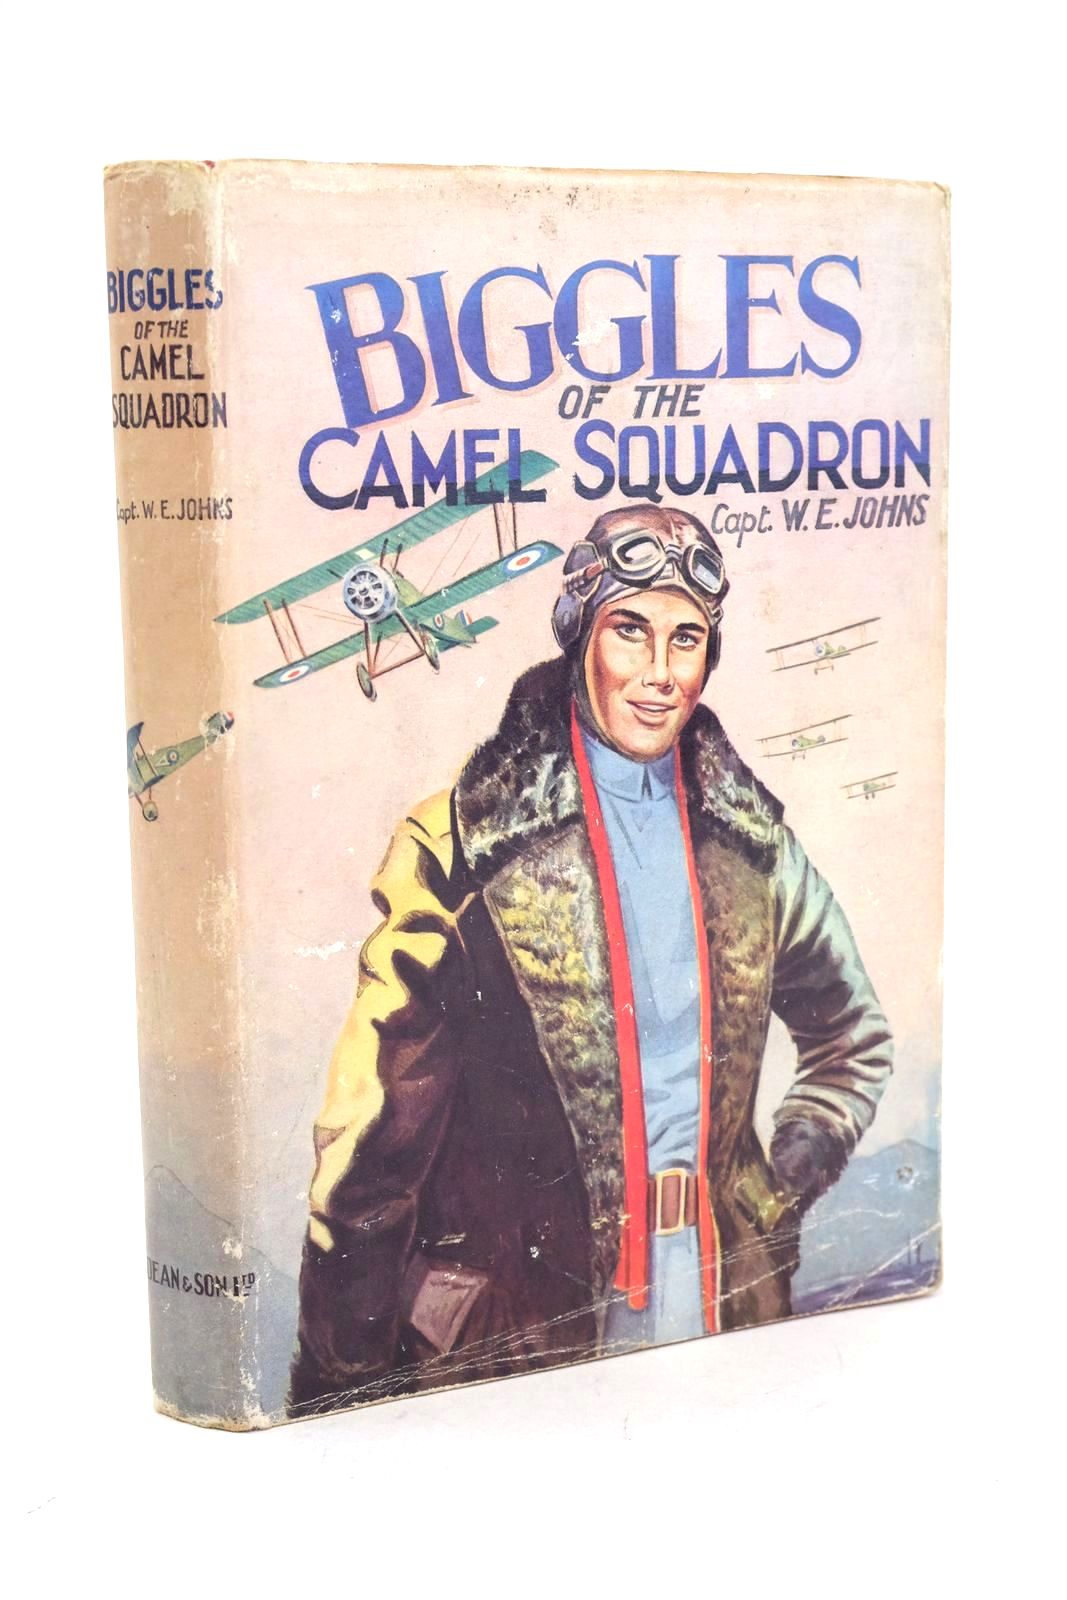 Photo of BIGGLES OF THE CAMEL SQUADRON written by Johns, W.E. published by Dean &amp; Son Ltd. (STOCK CODE: 1327193)  for sale by Stella & Rose's Books